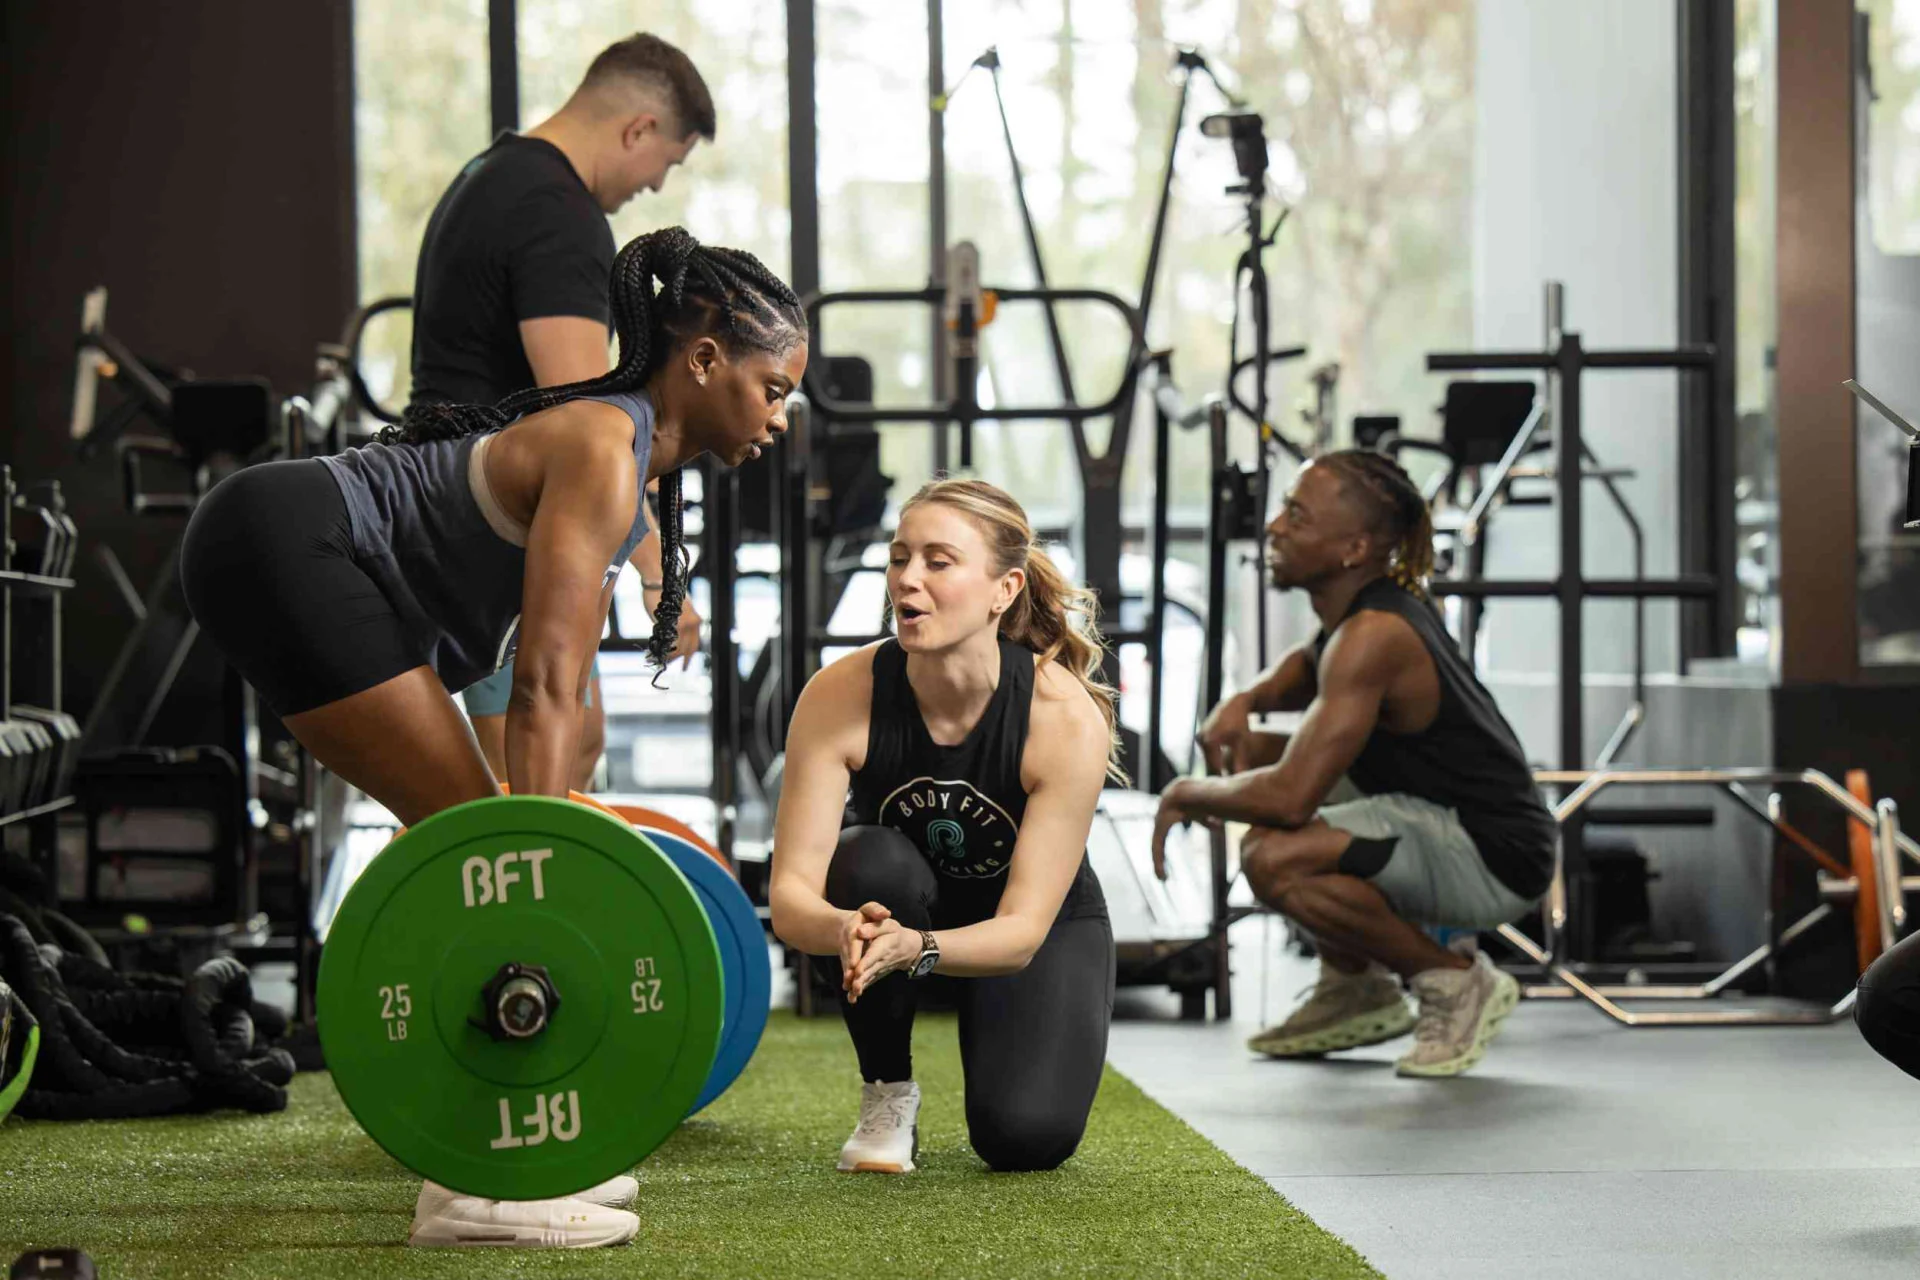 New south-side gym opens with focus on strength training, boot